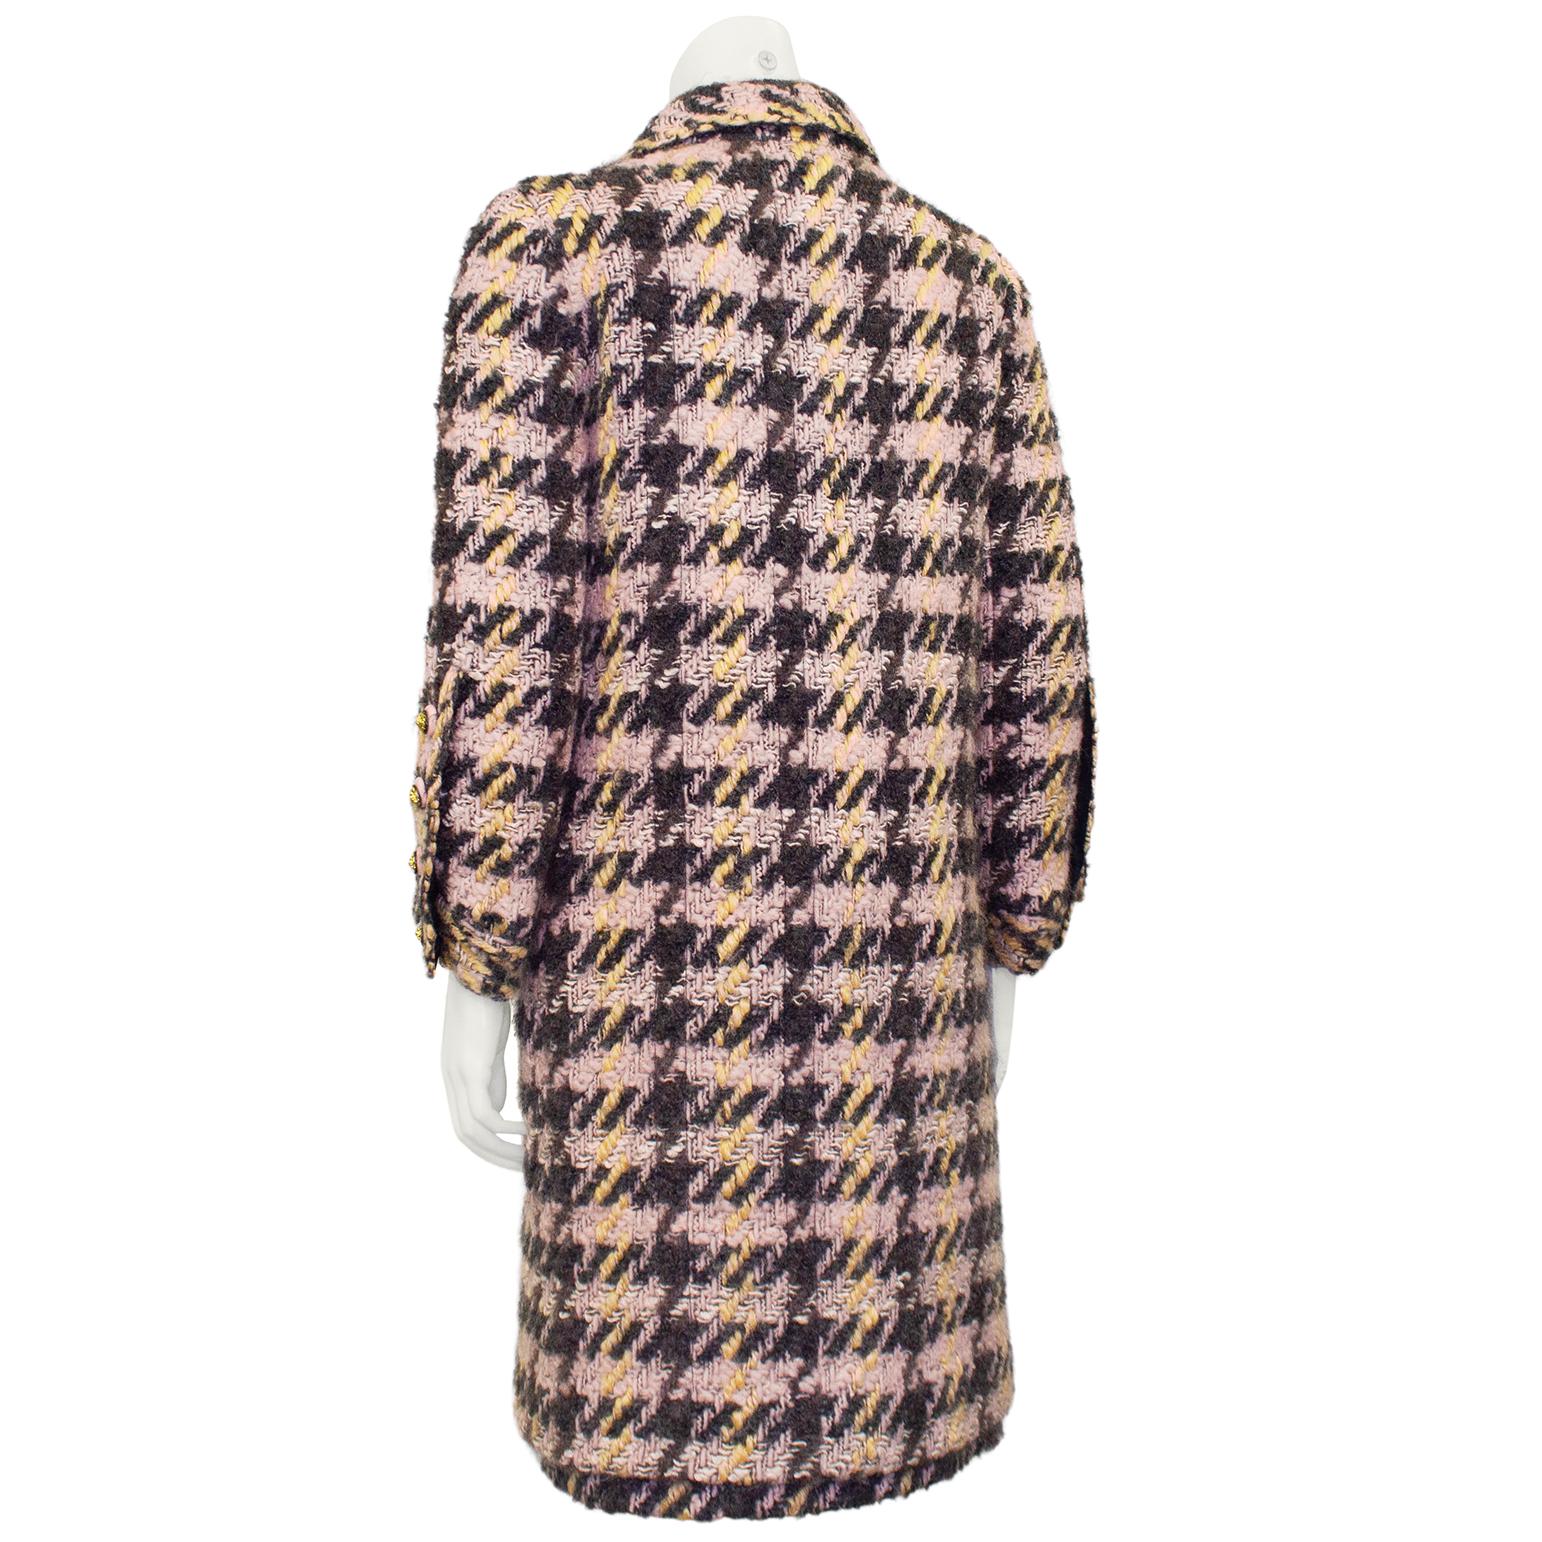 Women's 1960s Chanel Haute Couture Pink and Charcoal Grey Houndstooth 3 pc. Ensemble For Sale